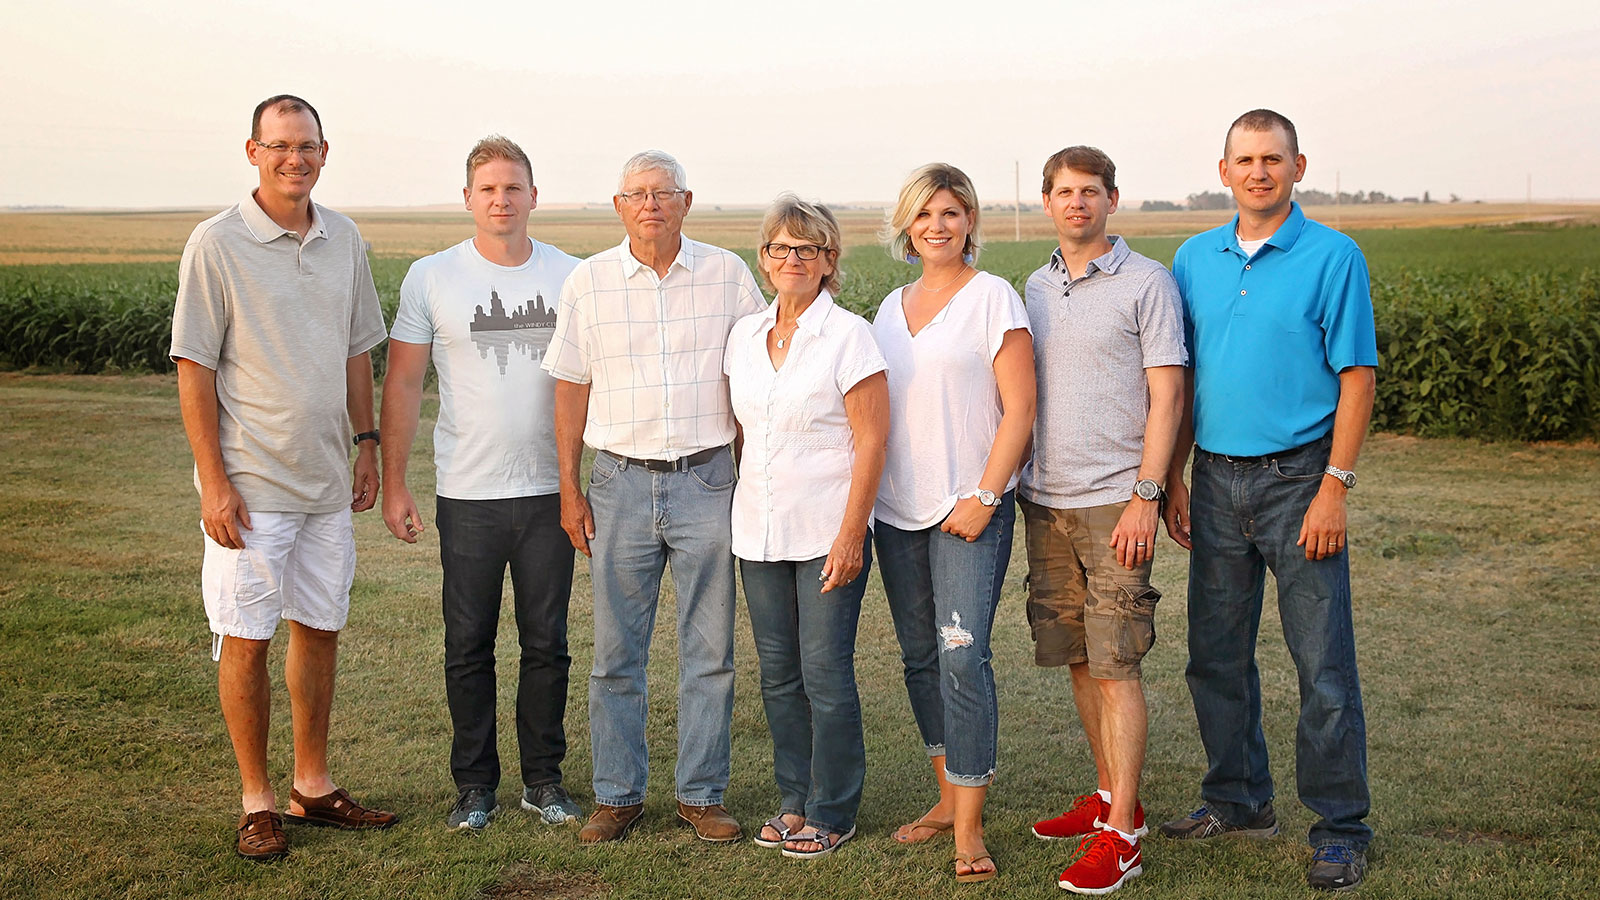 Paulsen Family posing for a photo in the country.